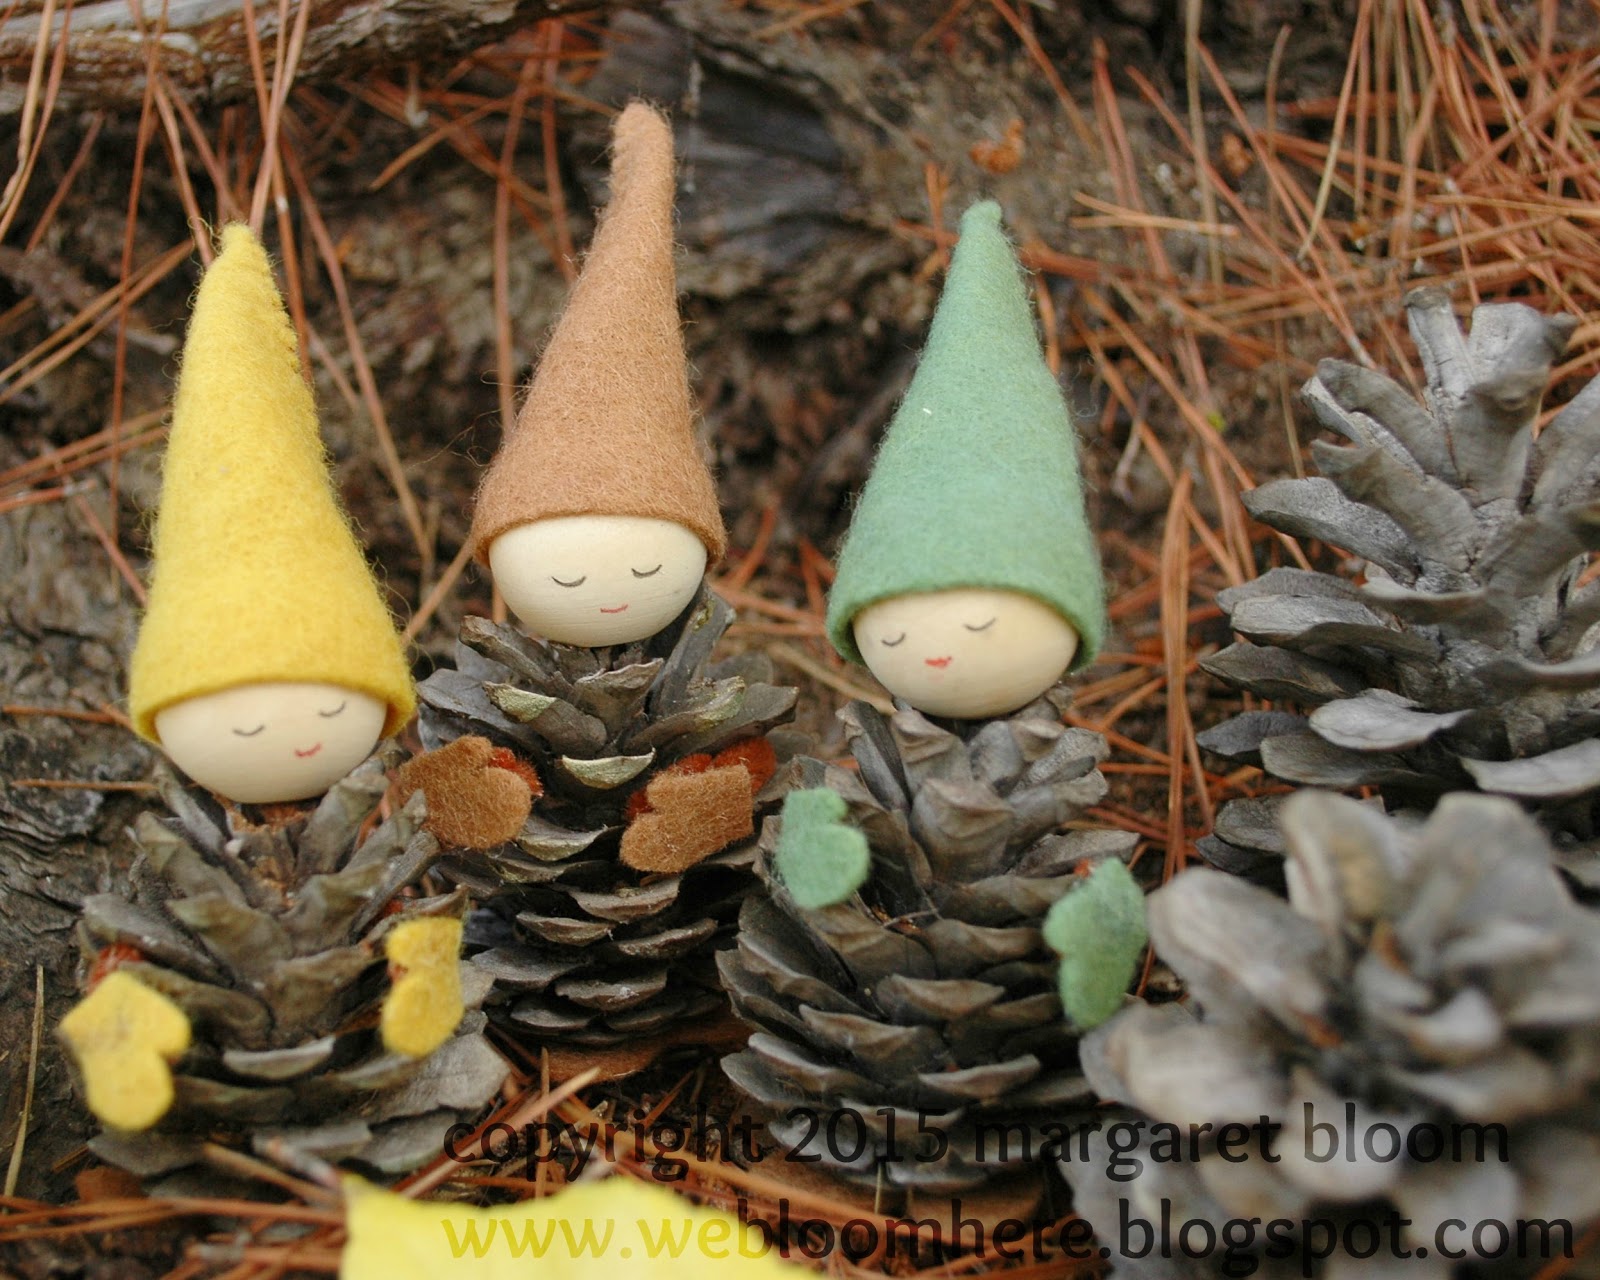 we bloom here: Pinecone Gnomes: a repost